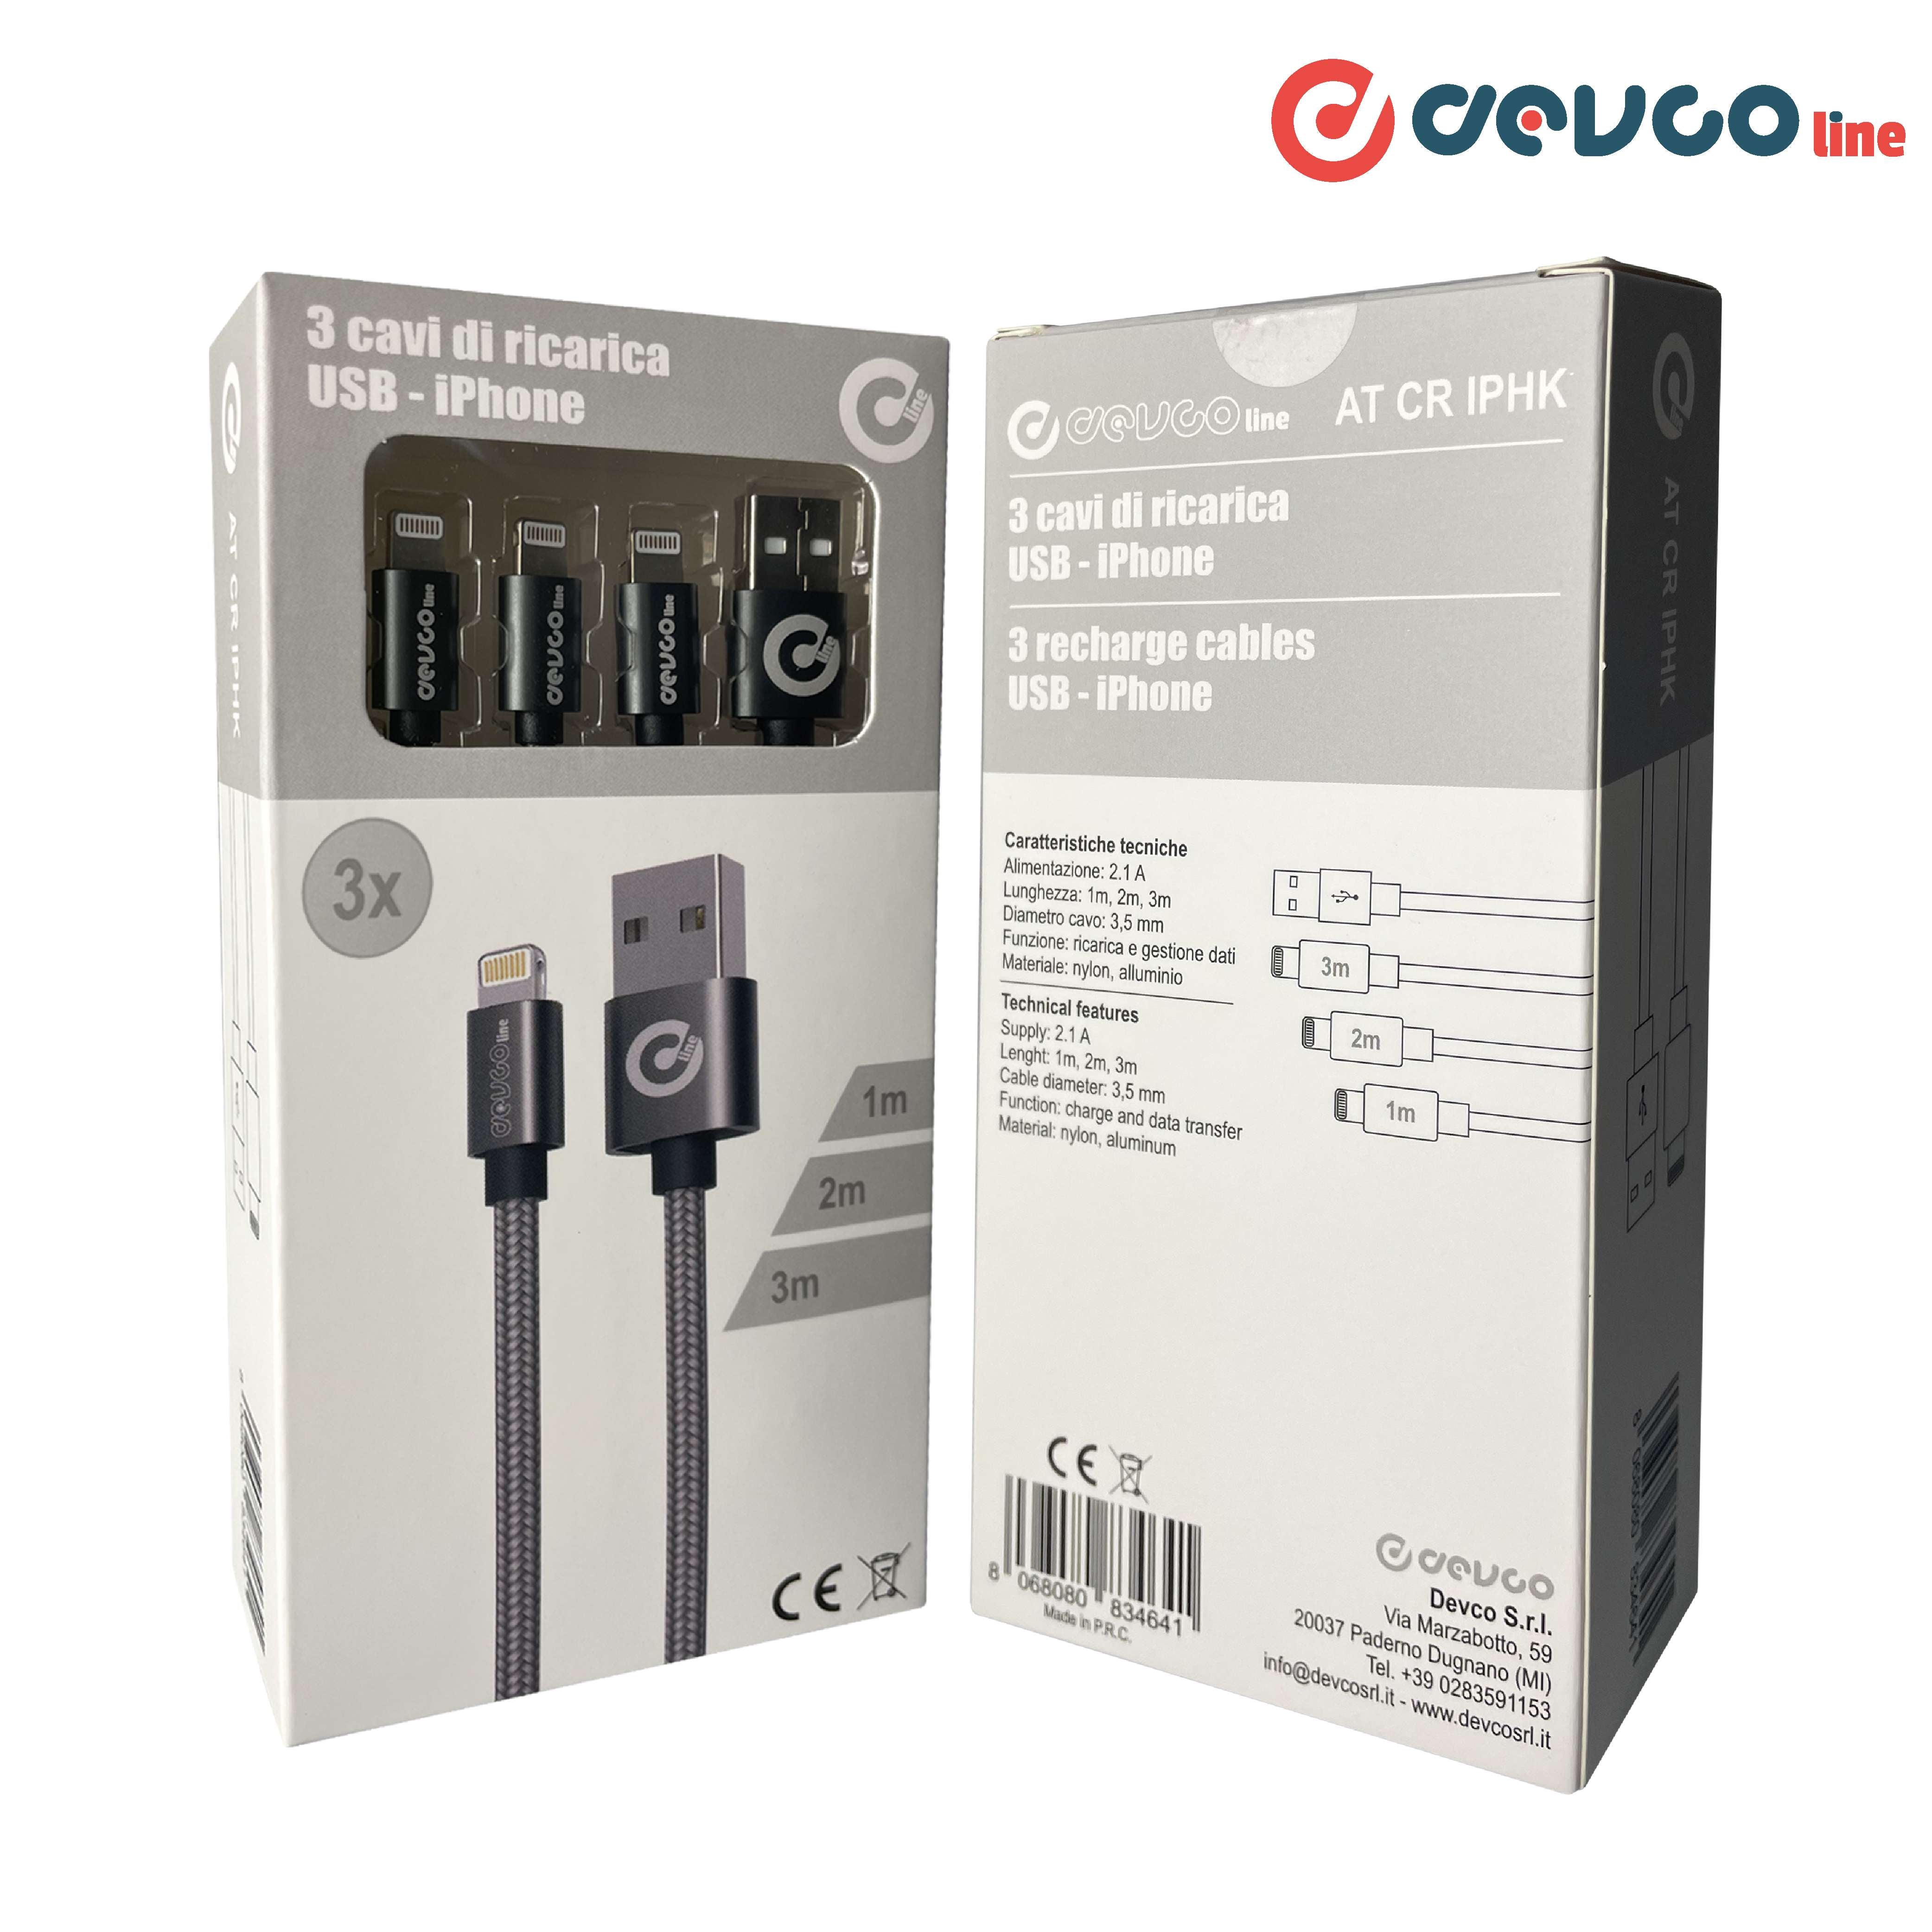 Kit set of 3 USB cables compatible with iPhone [1m, 2m, 3m] USB-A connection